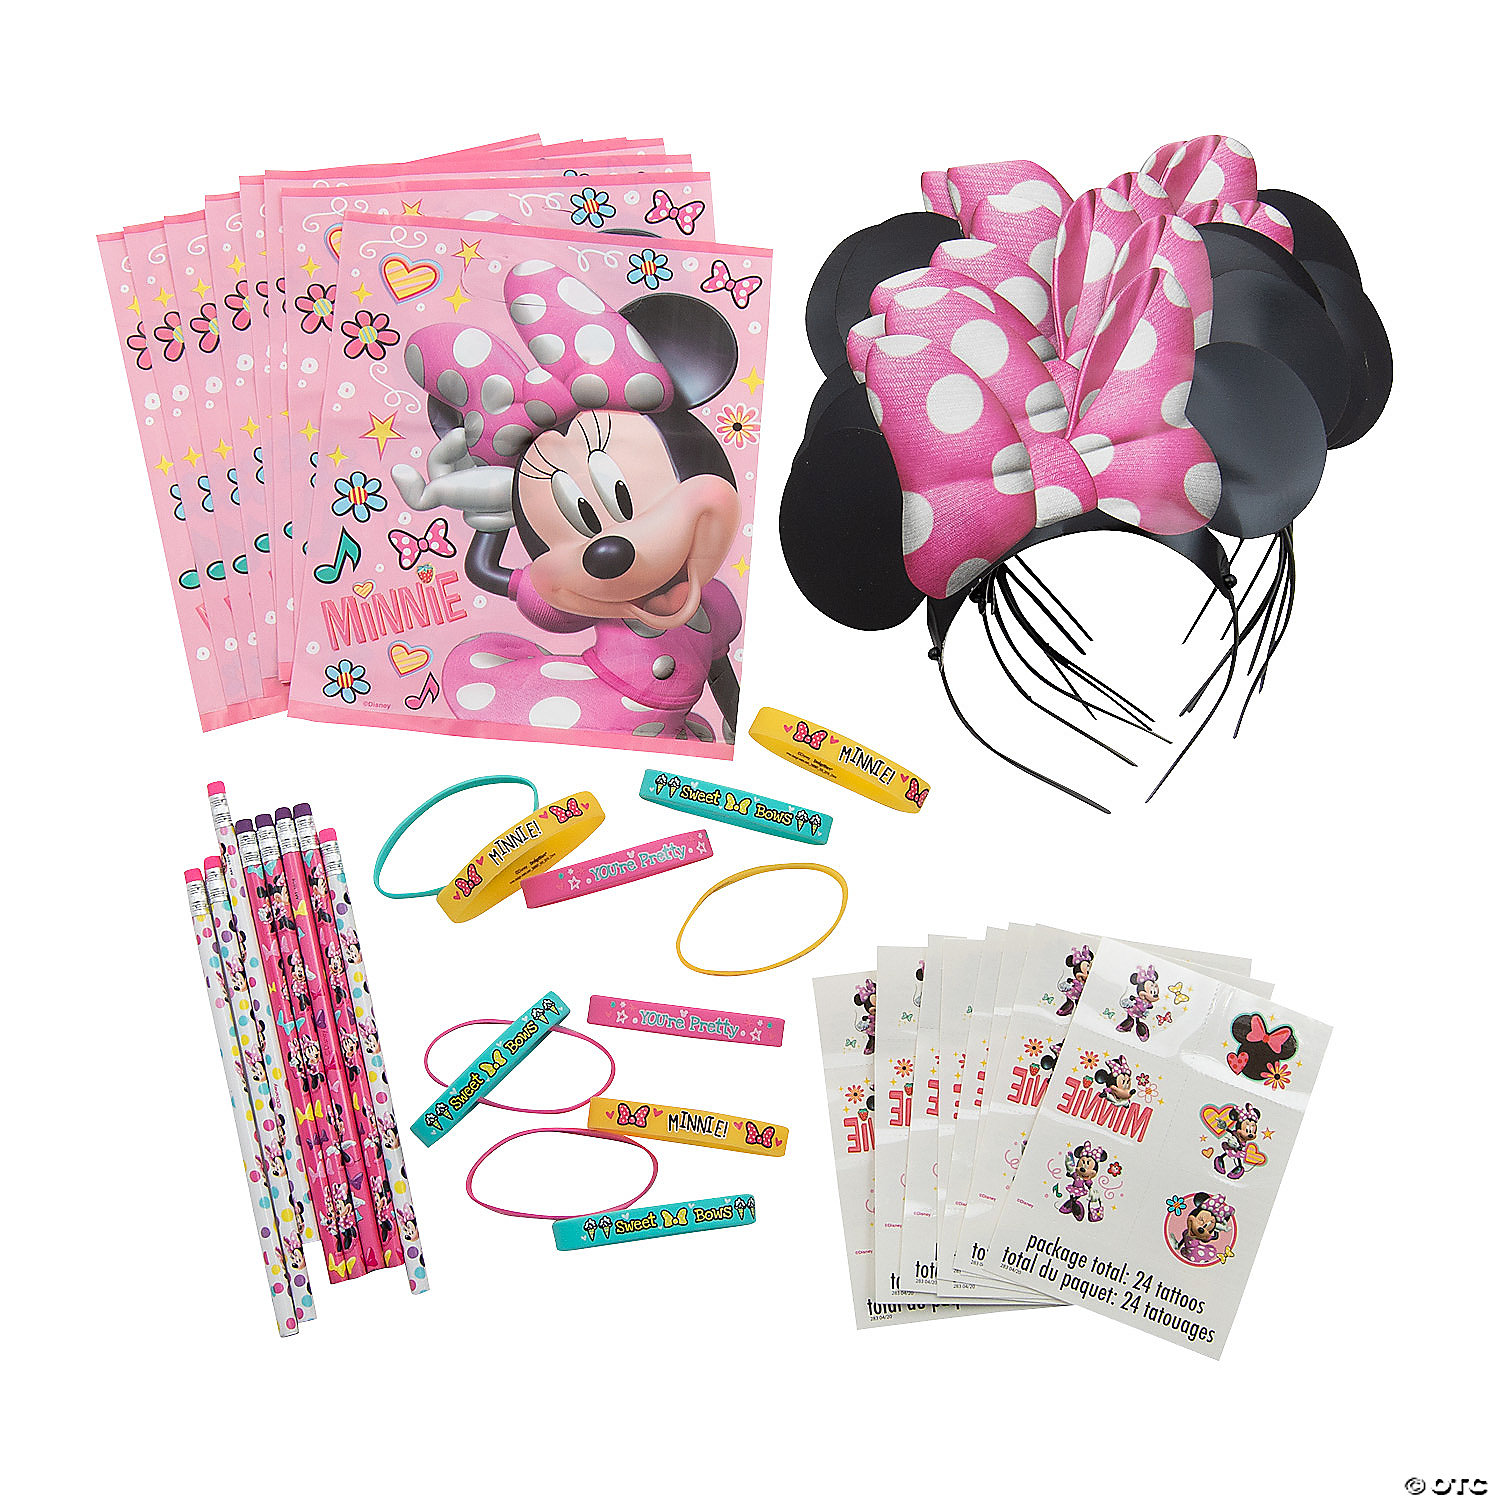 MINNIE MOUSE LOOT LOLLY TREAT BAGS PACK OF 8 BIRTHDAY PARTY SUPPLIES 